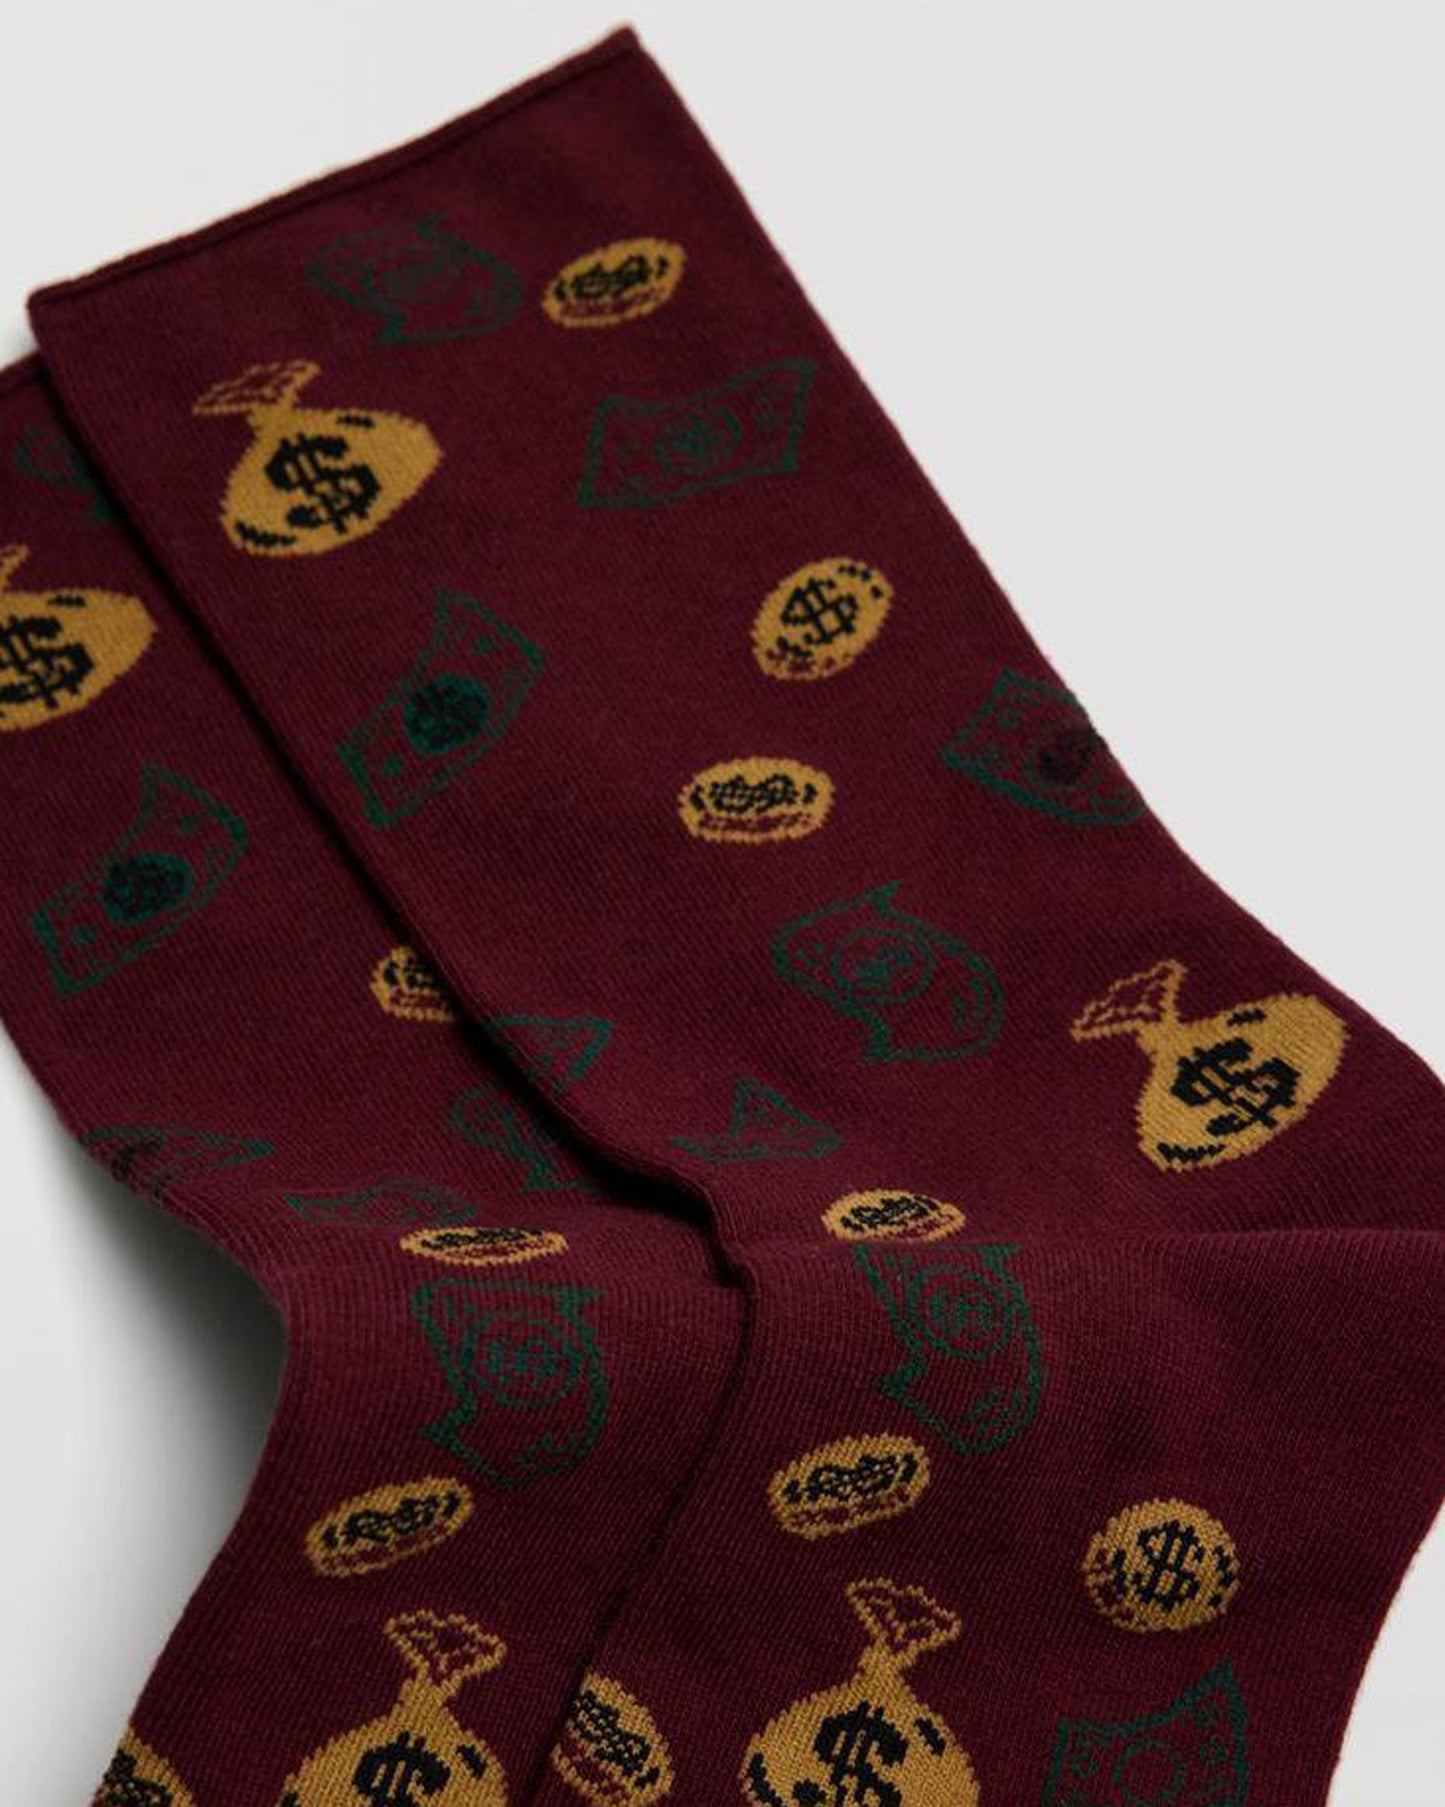 Ysabel Mora 22881 Money Socks - Wine cotton mix crew length ankle socks with a money themed pattern of coins, bags of cash with dollar signs and bank notes.